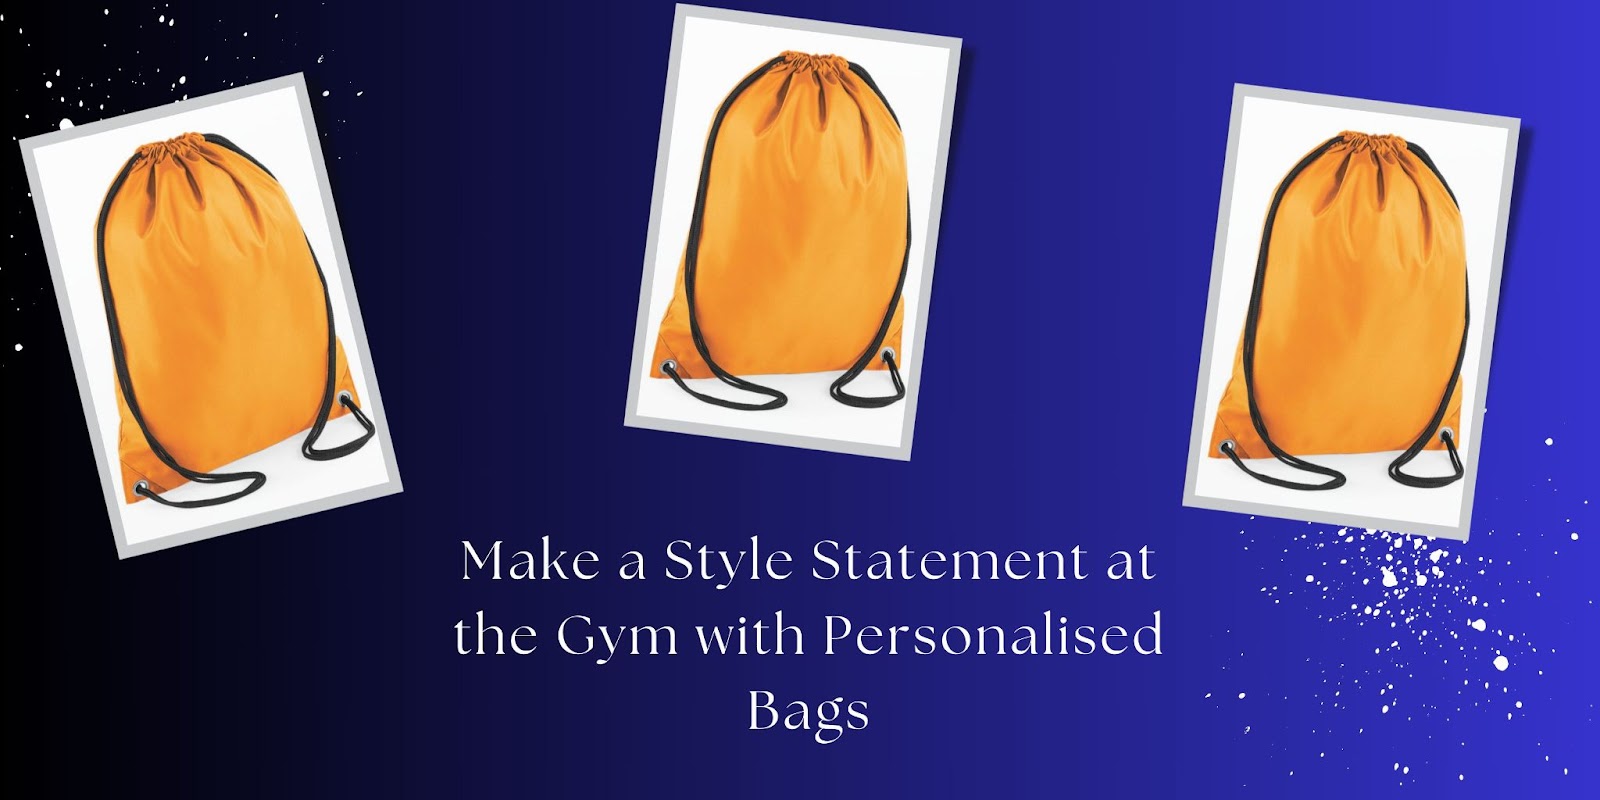 Make a Style Statement at the Gym with Personalised Bags